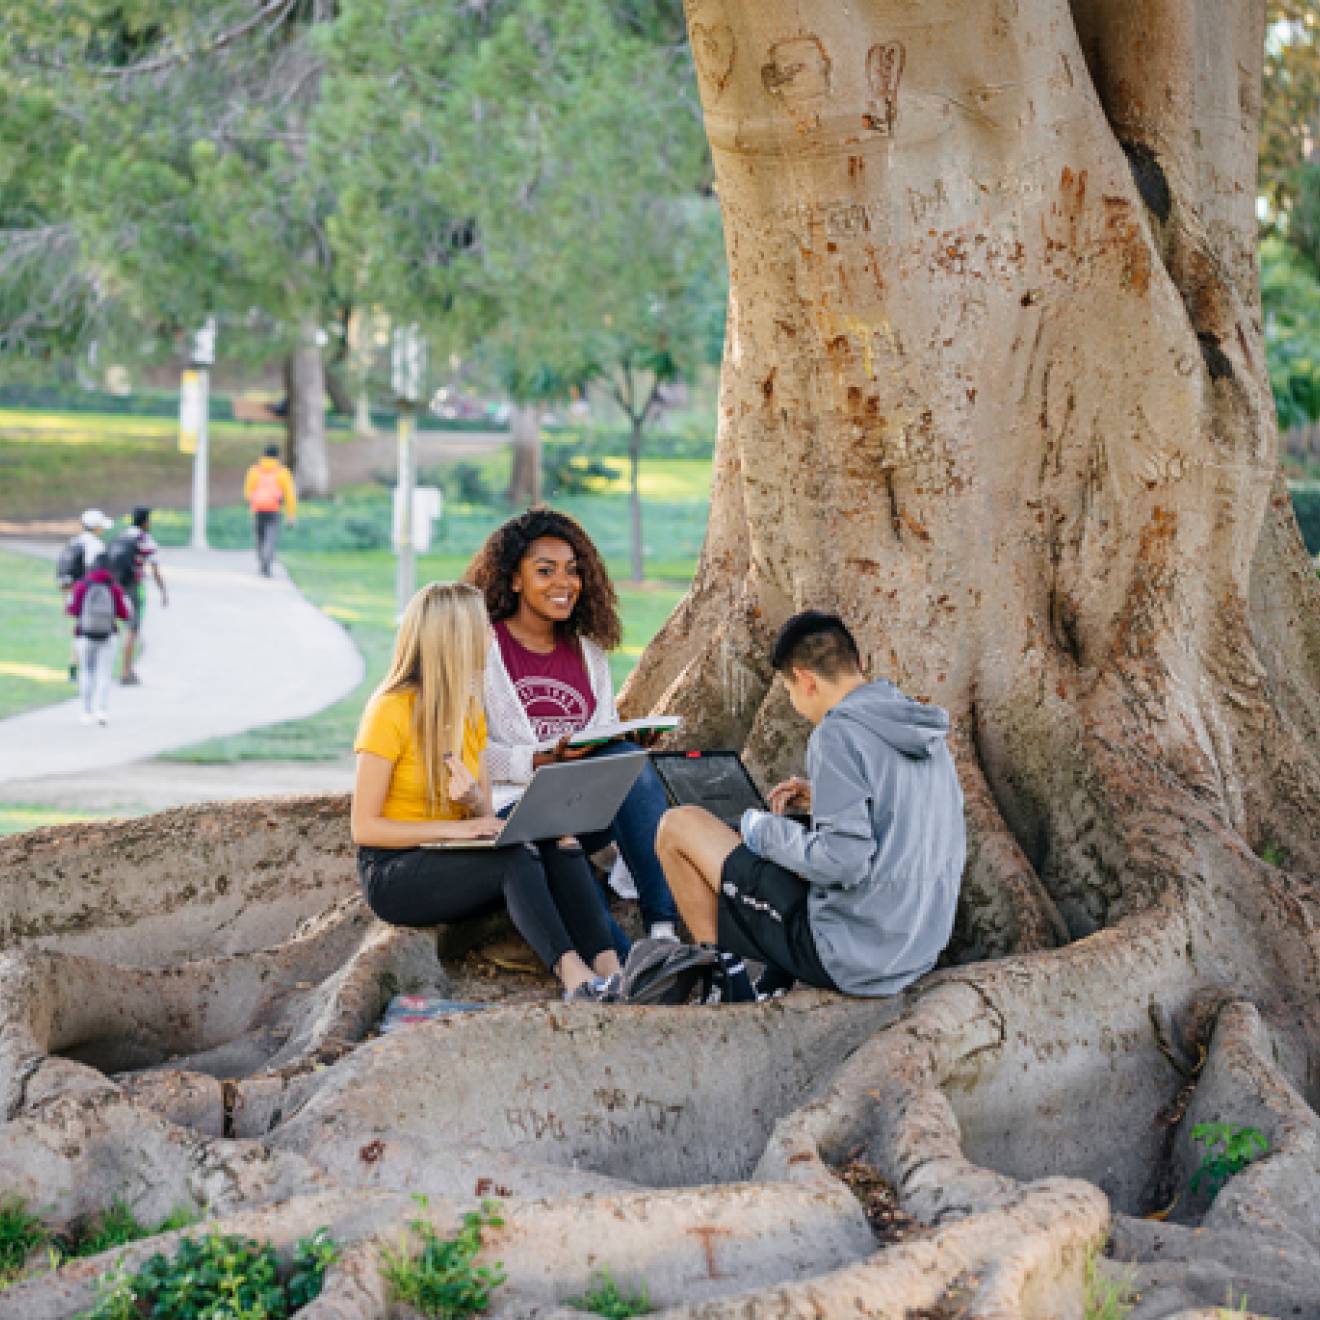 Three students sit under a tree on the Irvine campus